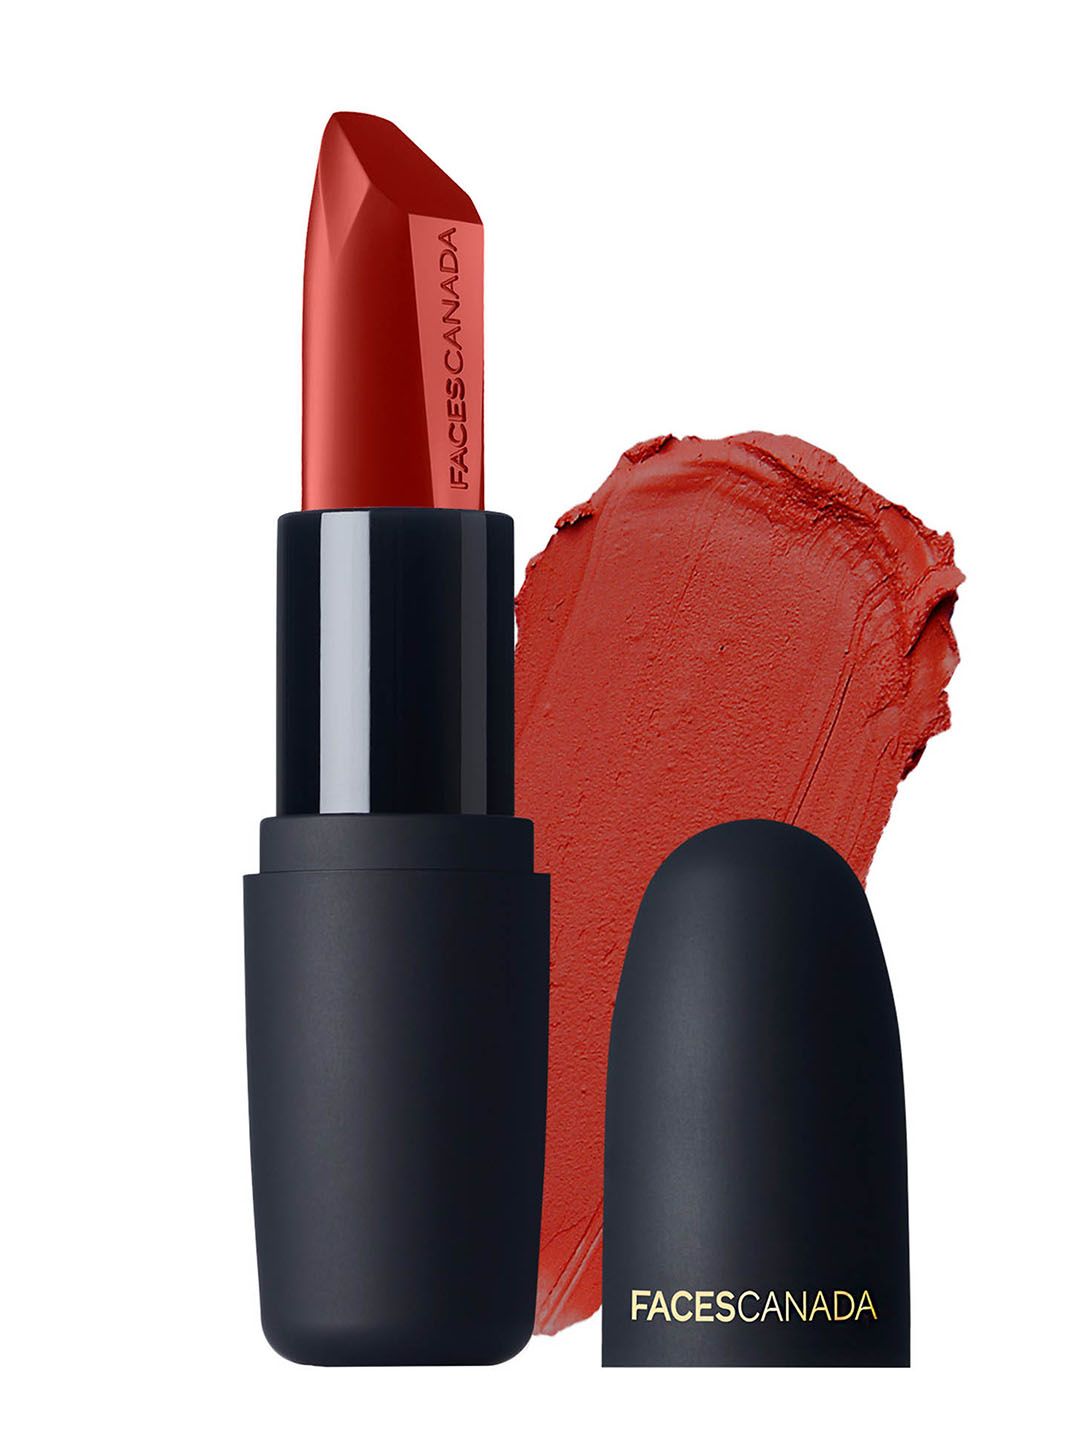 Faces Canada Weightless Matte Hydrating Lipstick with Almond Oil - Jungle Red 29 Price in India